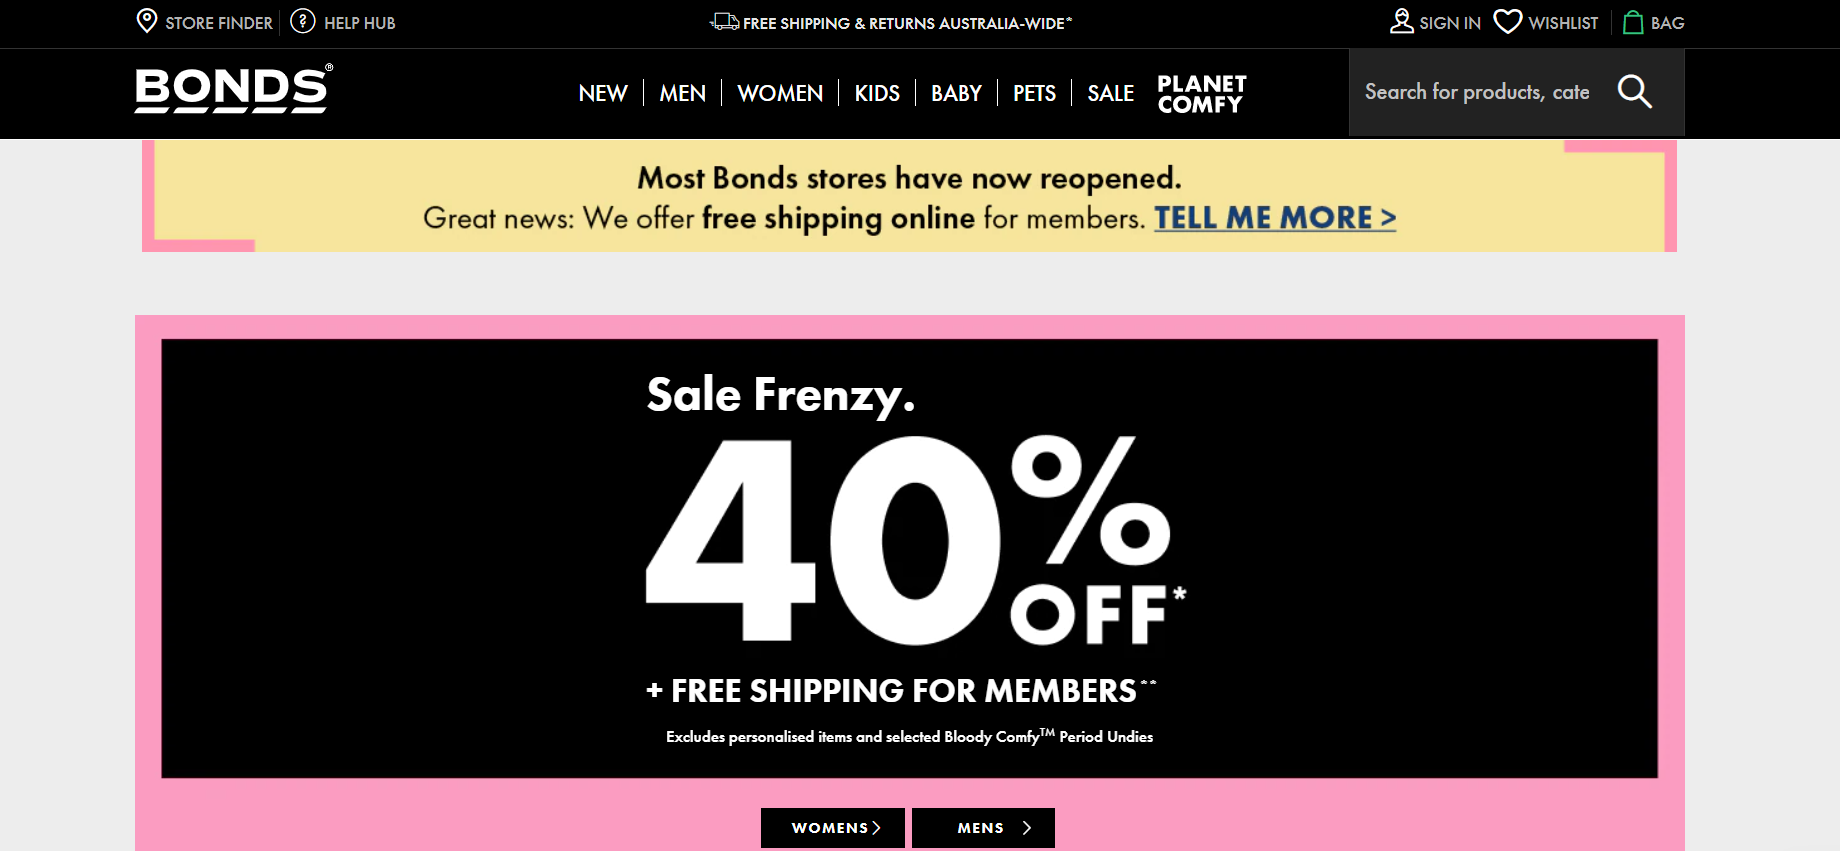 Bonds Frenzy sale 40% OFF + free shipping for members. Save on women, men, kids & babies styles